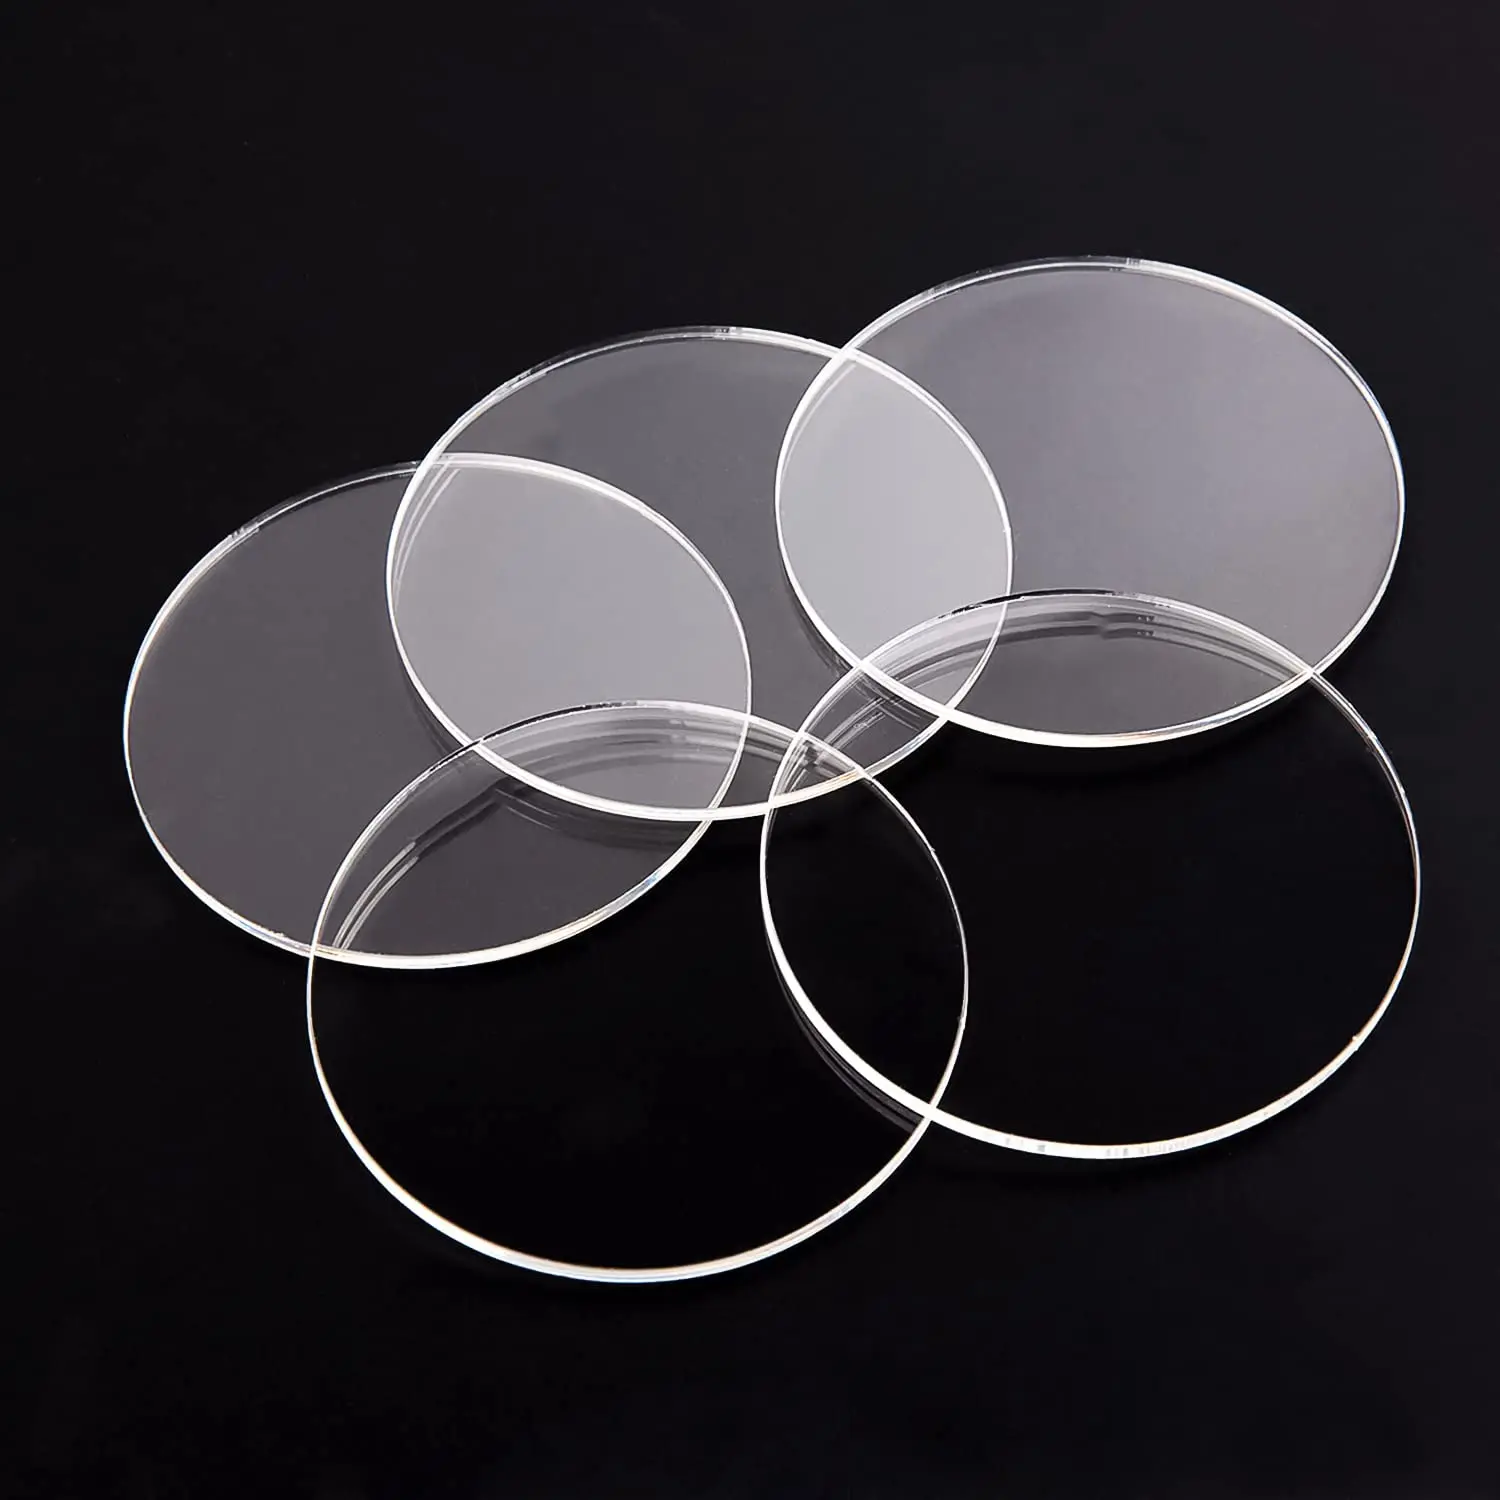 45 Pieces Clear Acrylic Circles Clear Disc Transparent Acrylic Round Circle Clear Disc Acrylic Sheet Acrylic Plastic Disc for Art Project and DIY